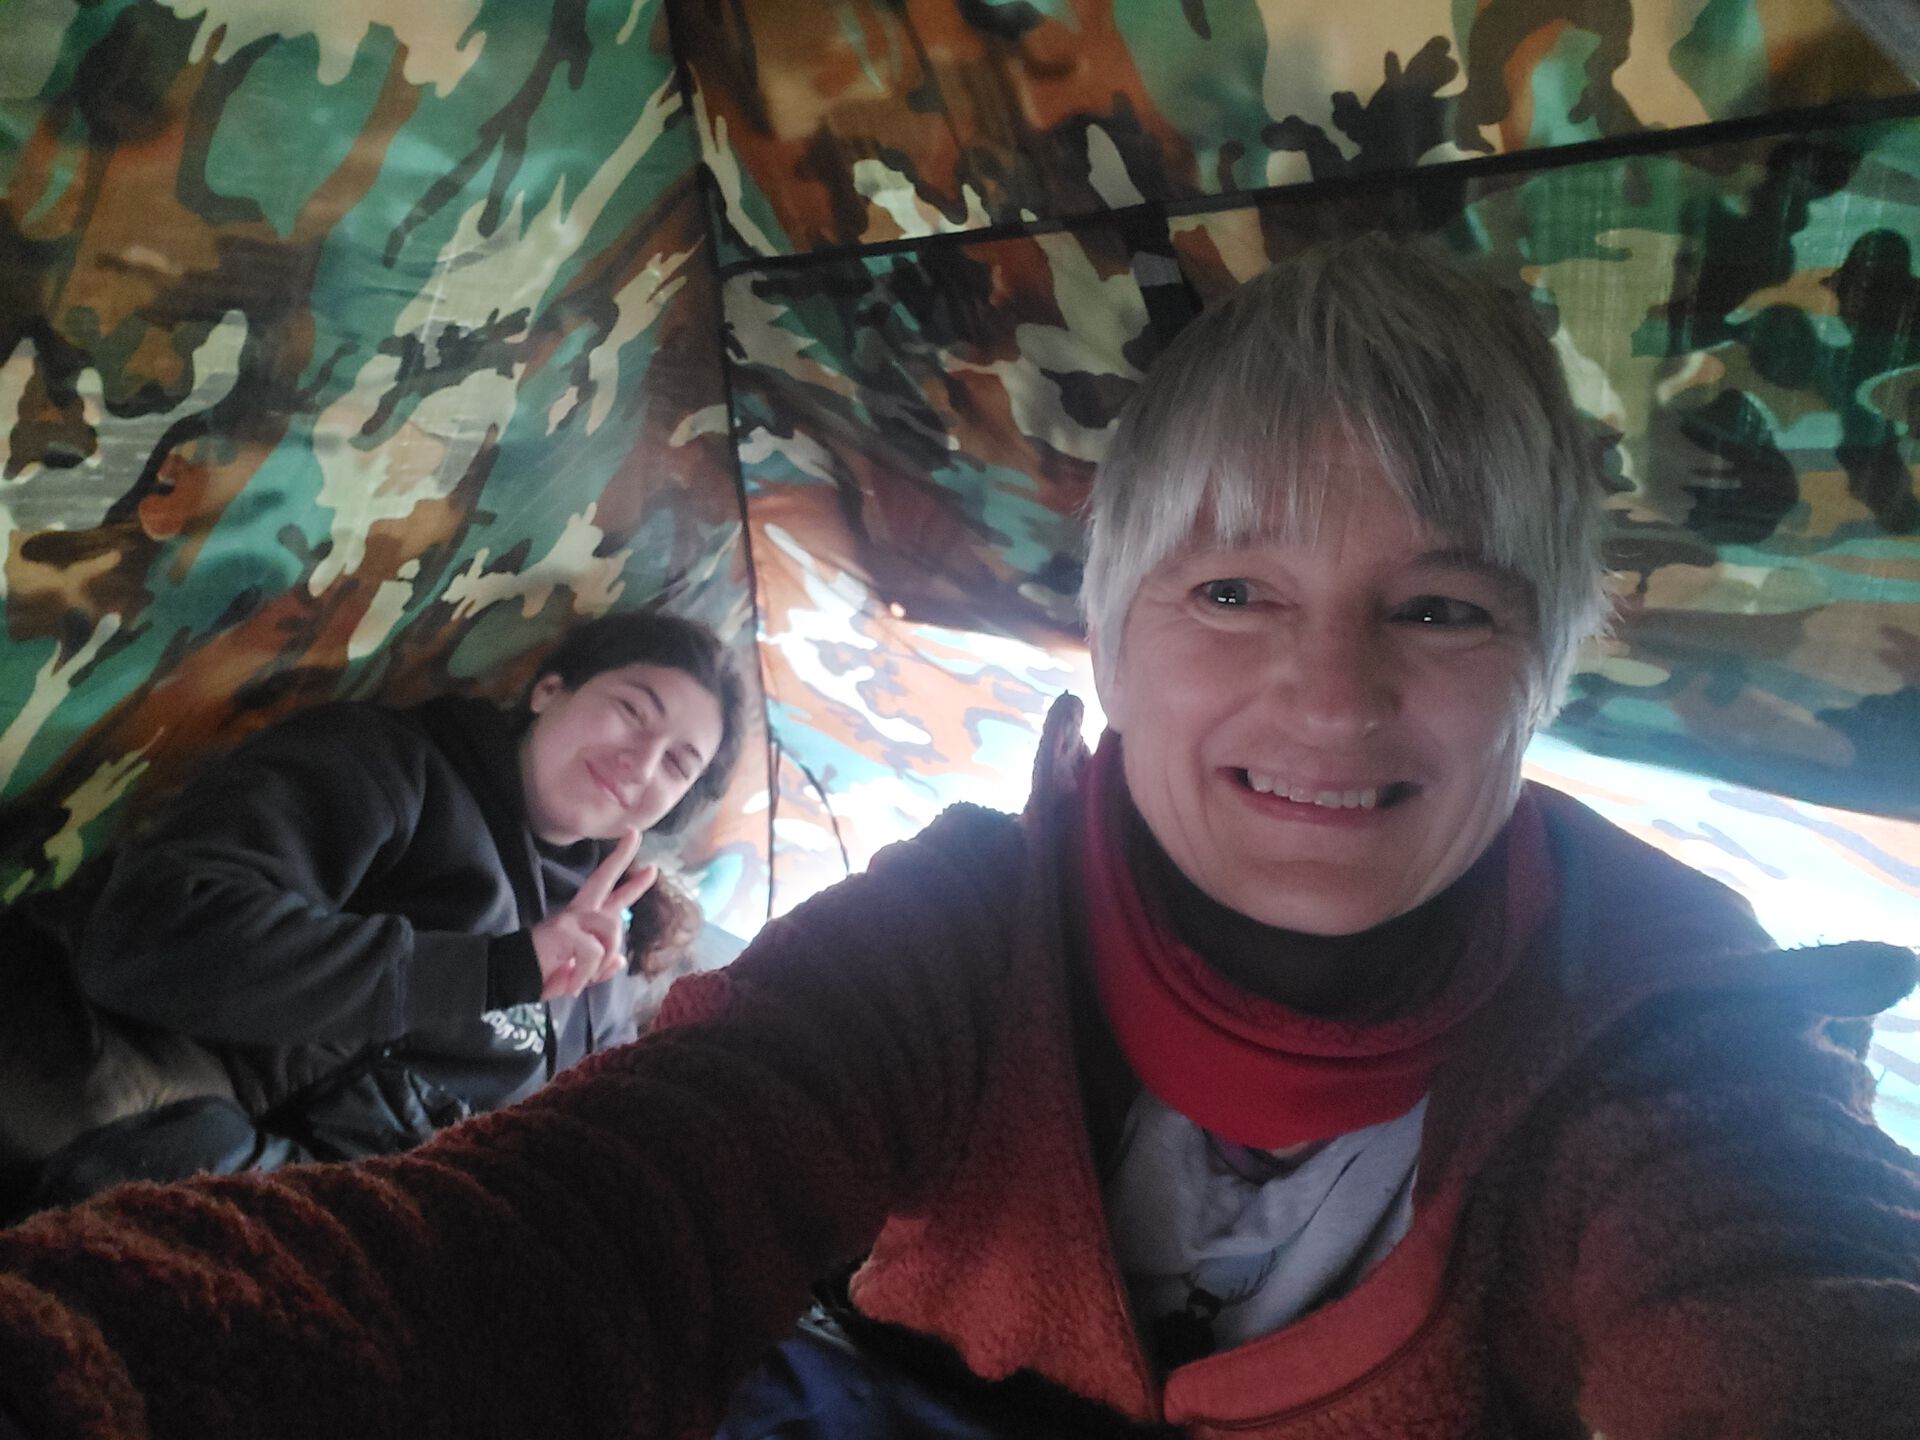 A teacher and a student in a tent with camouflage-pattern. The teacher smiles, and the student in the background smiles and shows the "peace" sign.